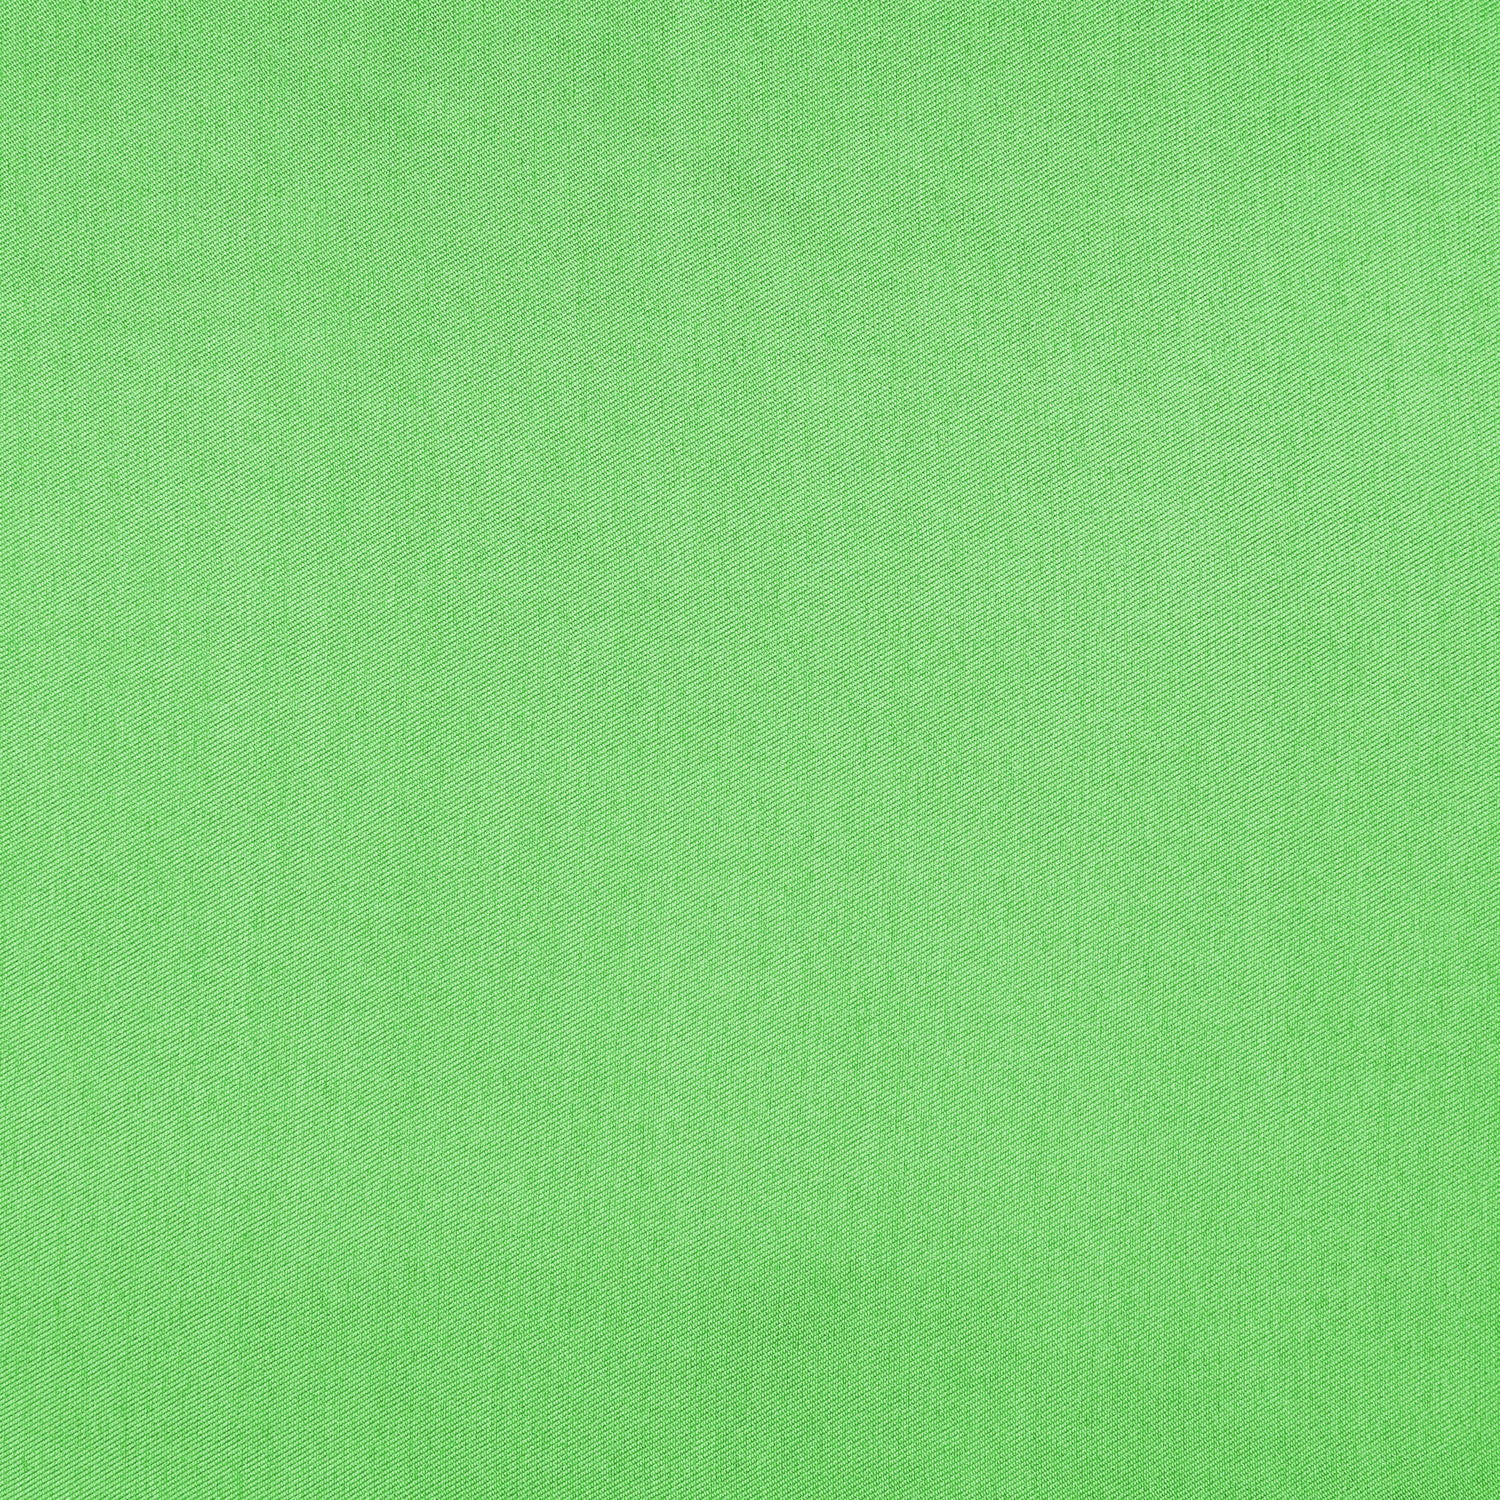 Satin The Lime Yard, Twill, Sewing, Fabric DIY, Mikado ZELOUF Sherbet, Yard Crafts By 1